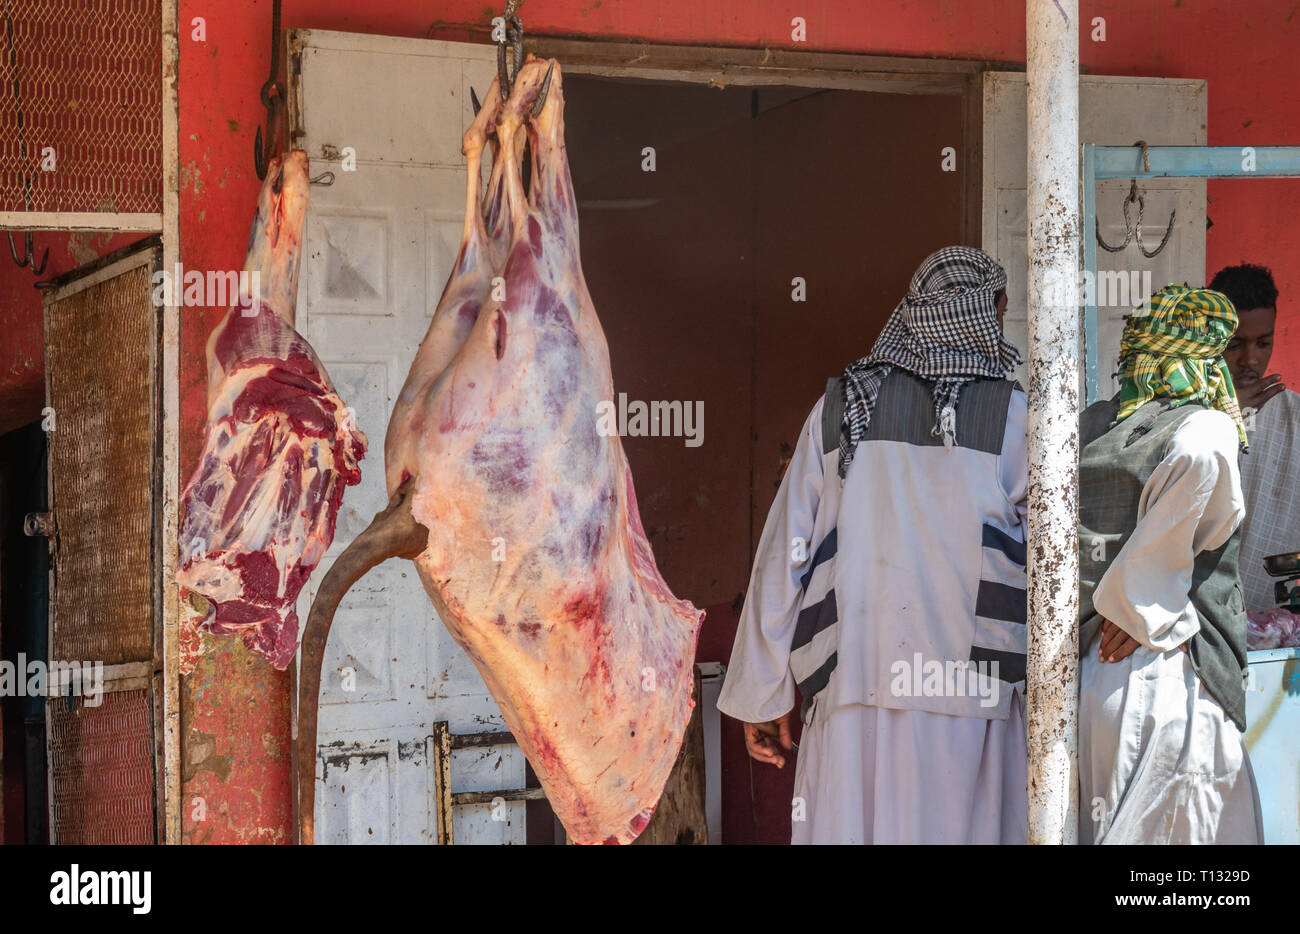 Nuri, Sudan, February 9., 2019: A large piece of beef hangs in front of a butcher's while men negotiate with the butcher in caftans and turban. Stock Photo